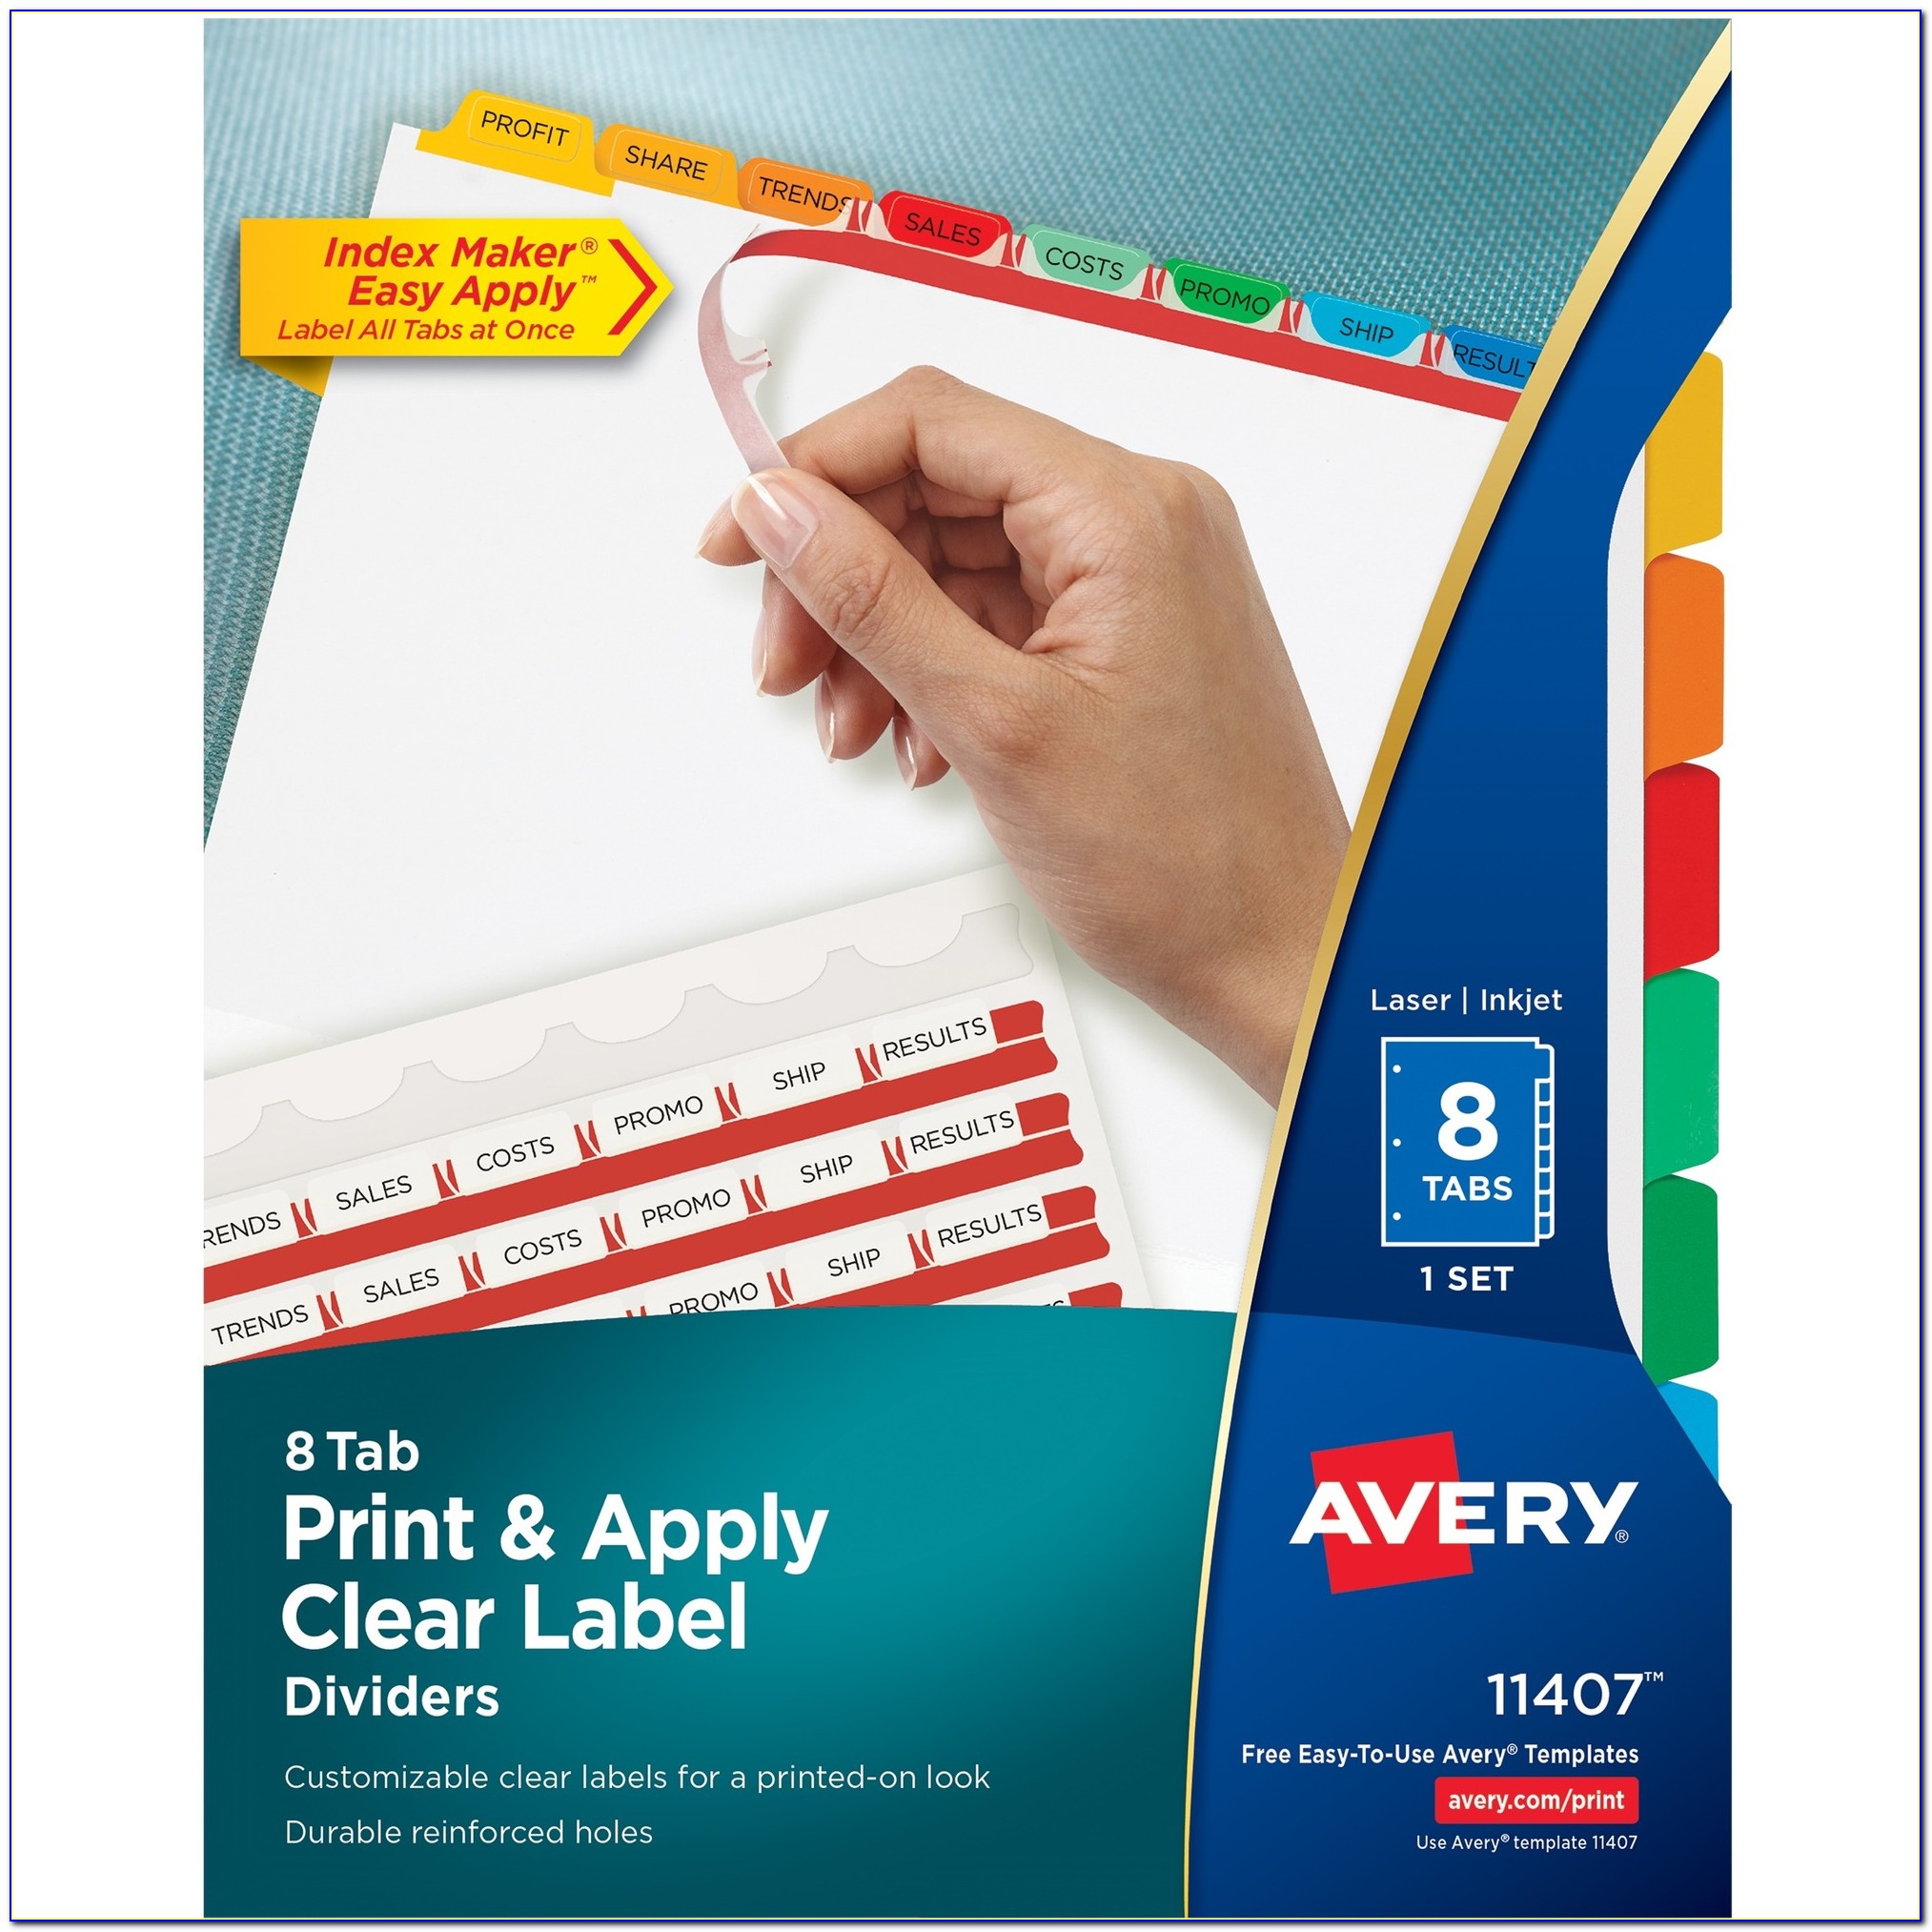 Avery 5 Tab Clear Label Divider Template